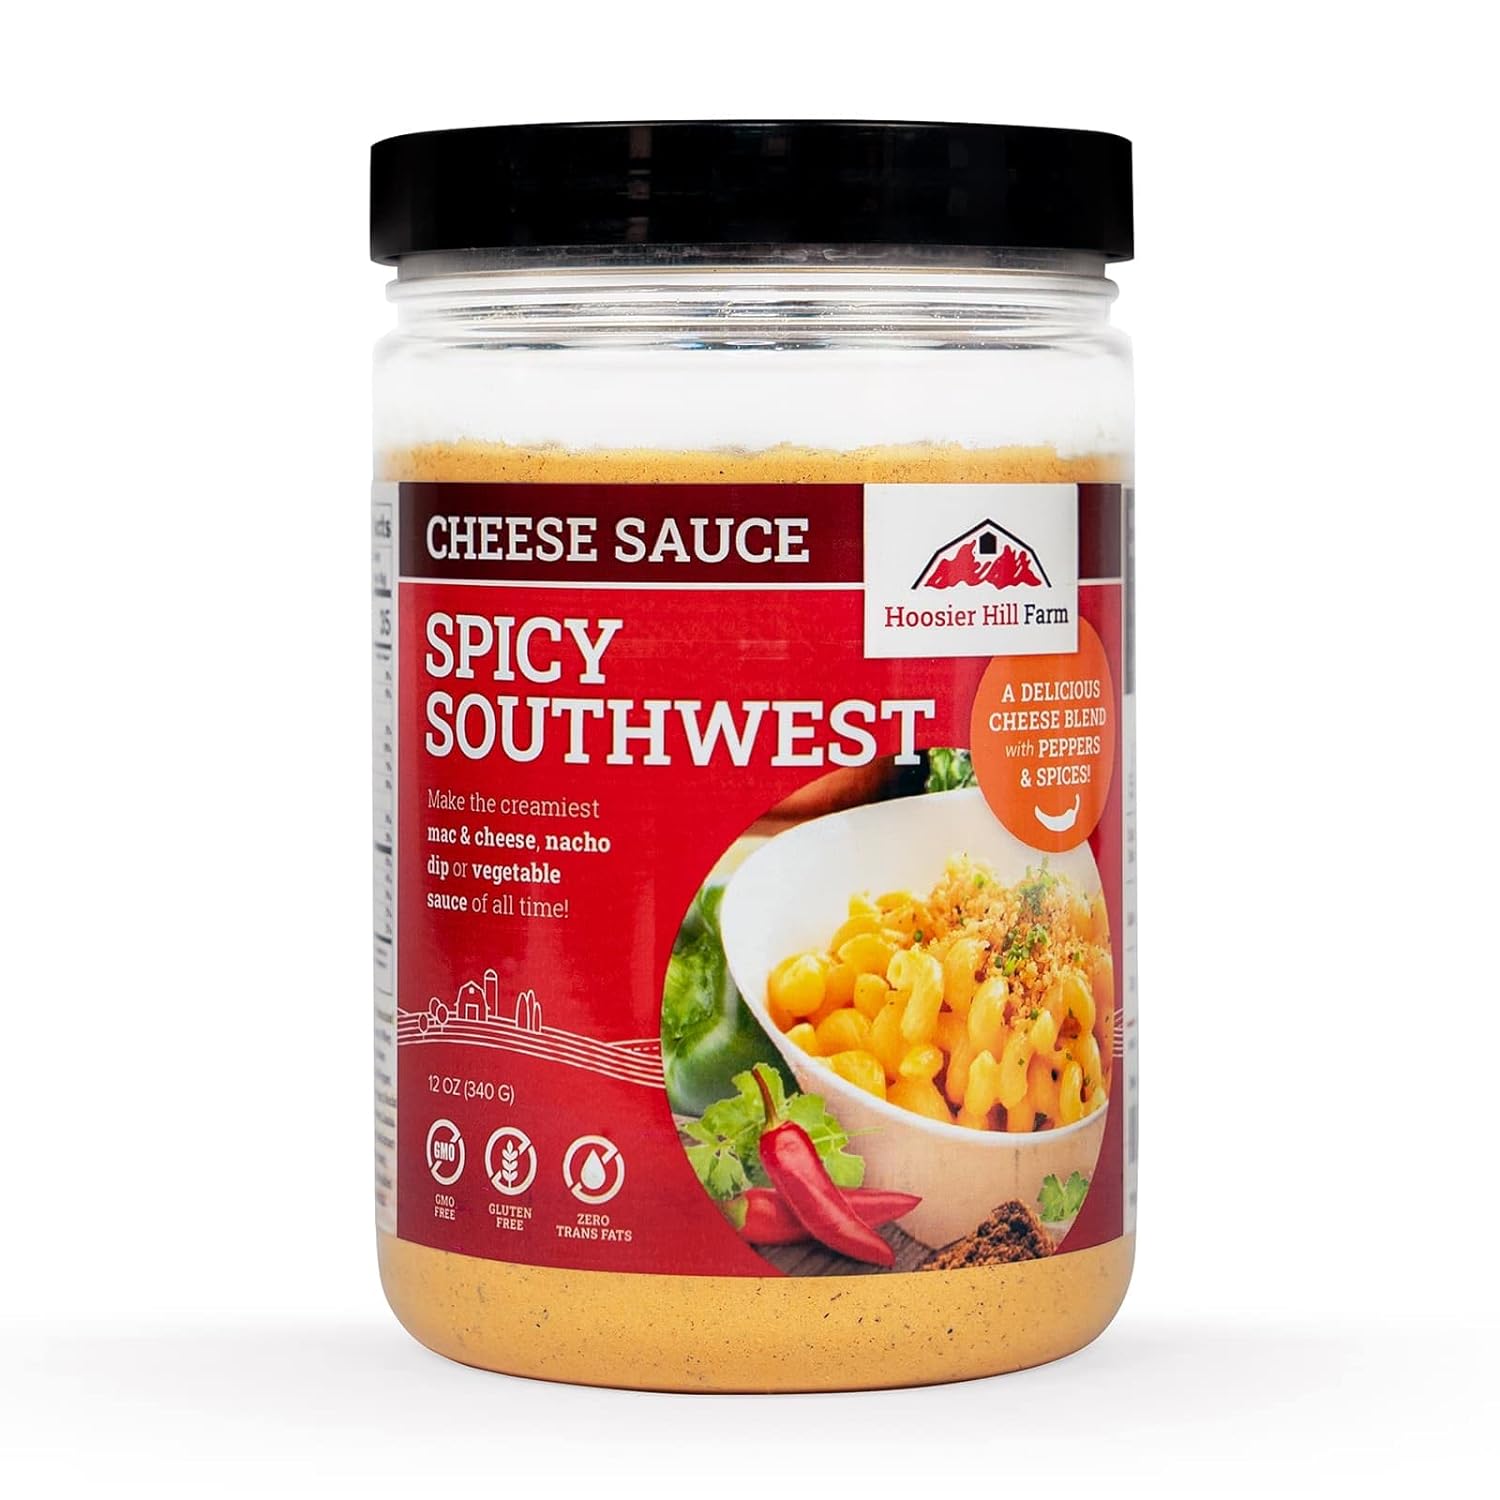 Hoosier Hill Farm Spicy Southwest Cheese Sauce Mix, 12oz (Pack of 1)